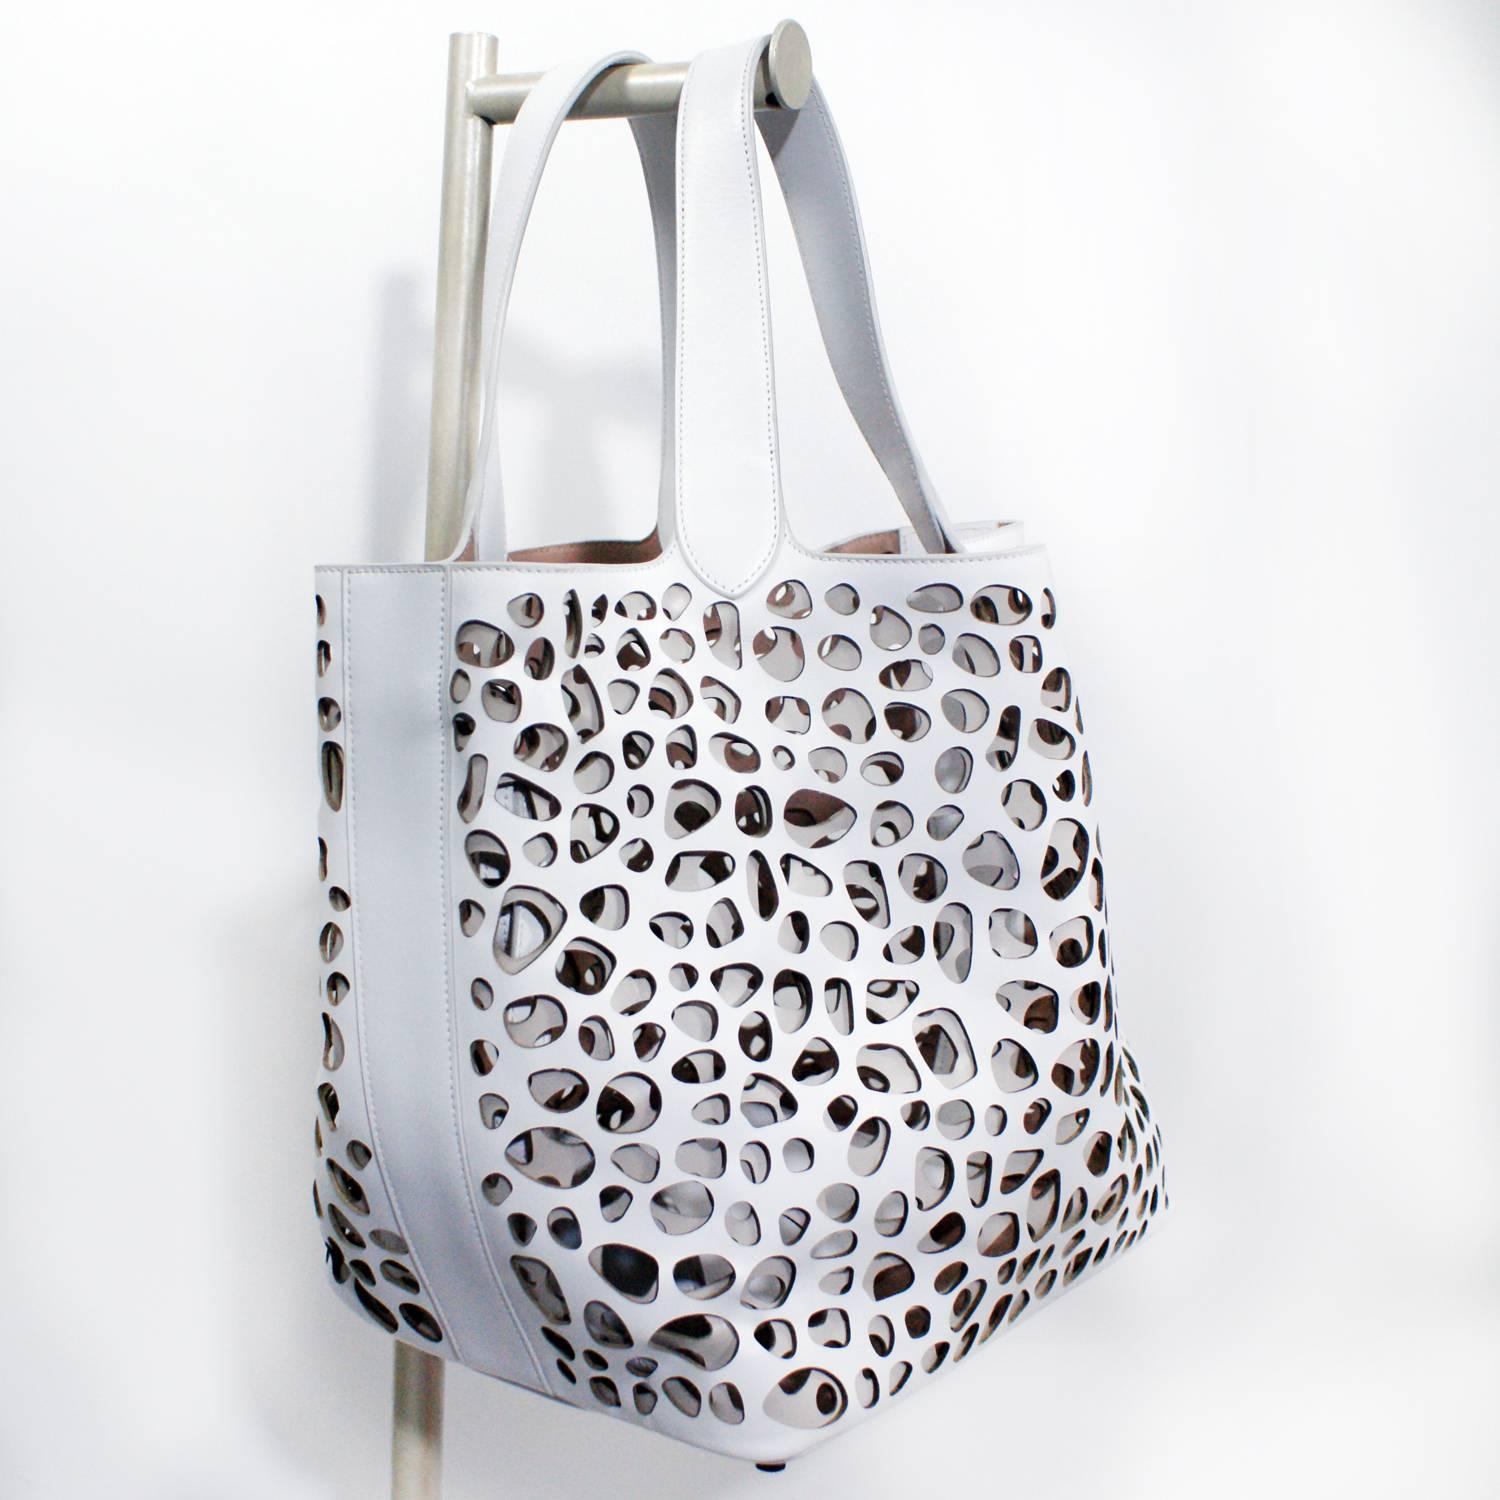 White leather cut out design
Taupe interior leather
Two tote handles
zip clutch inside 
